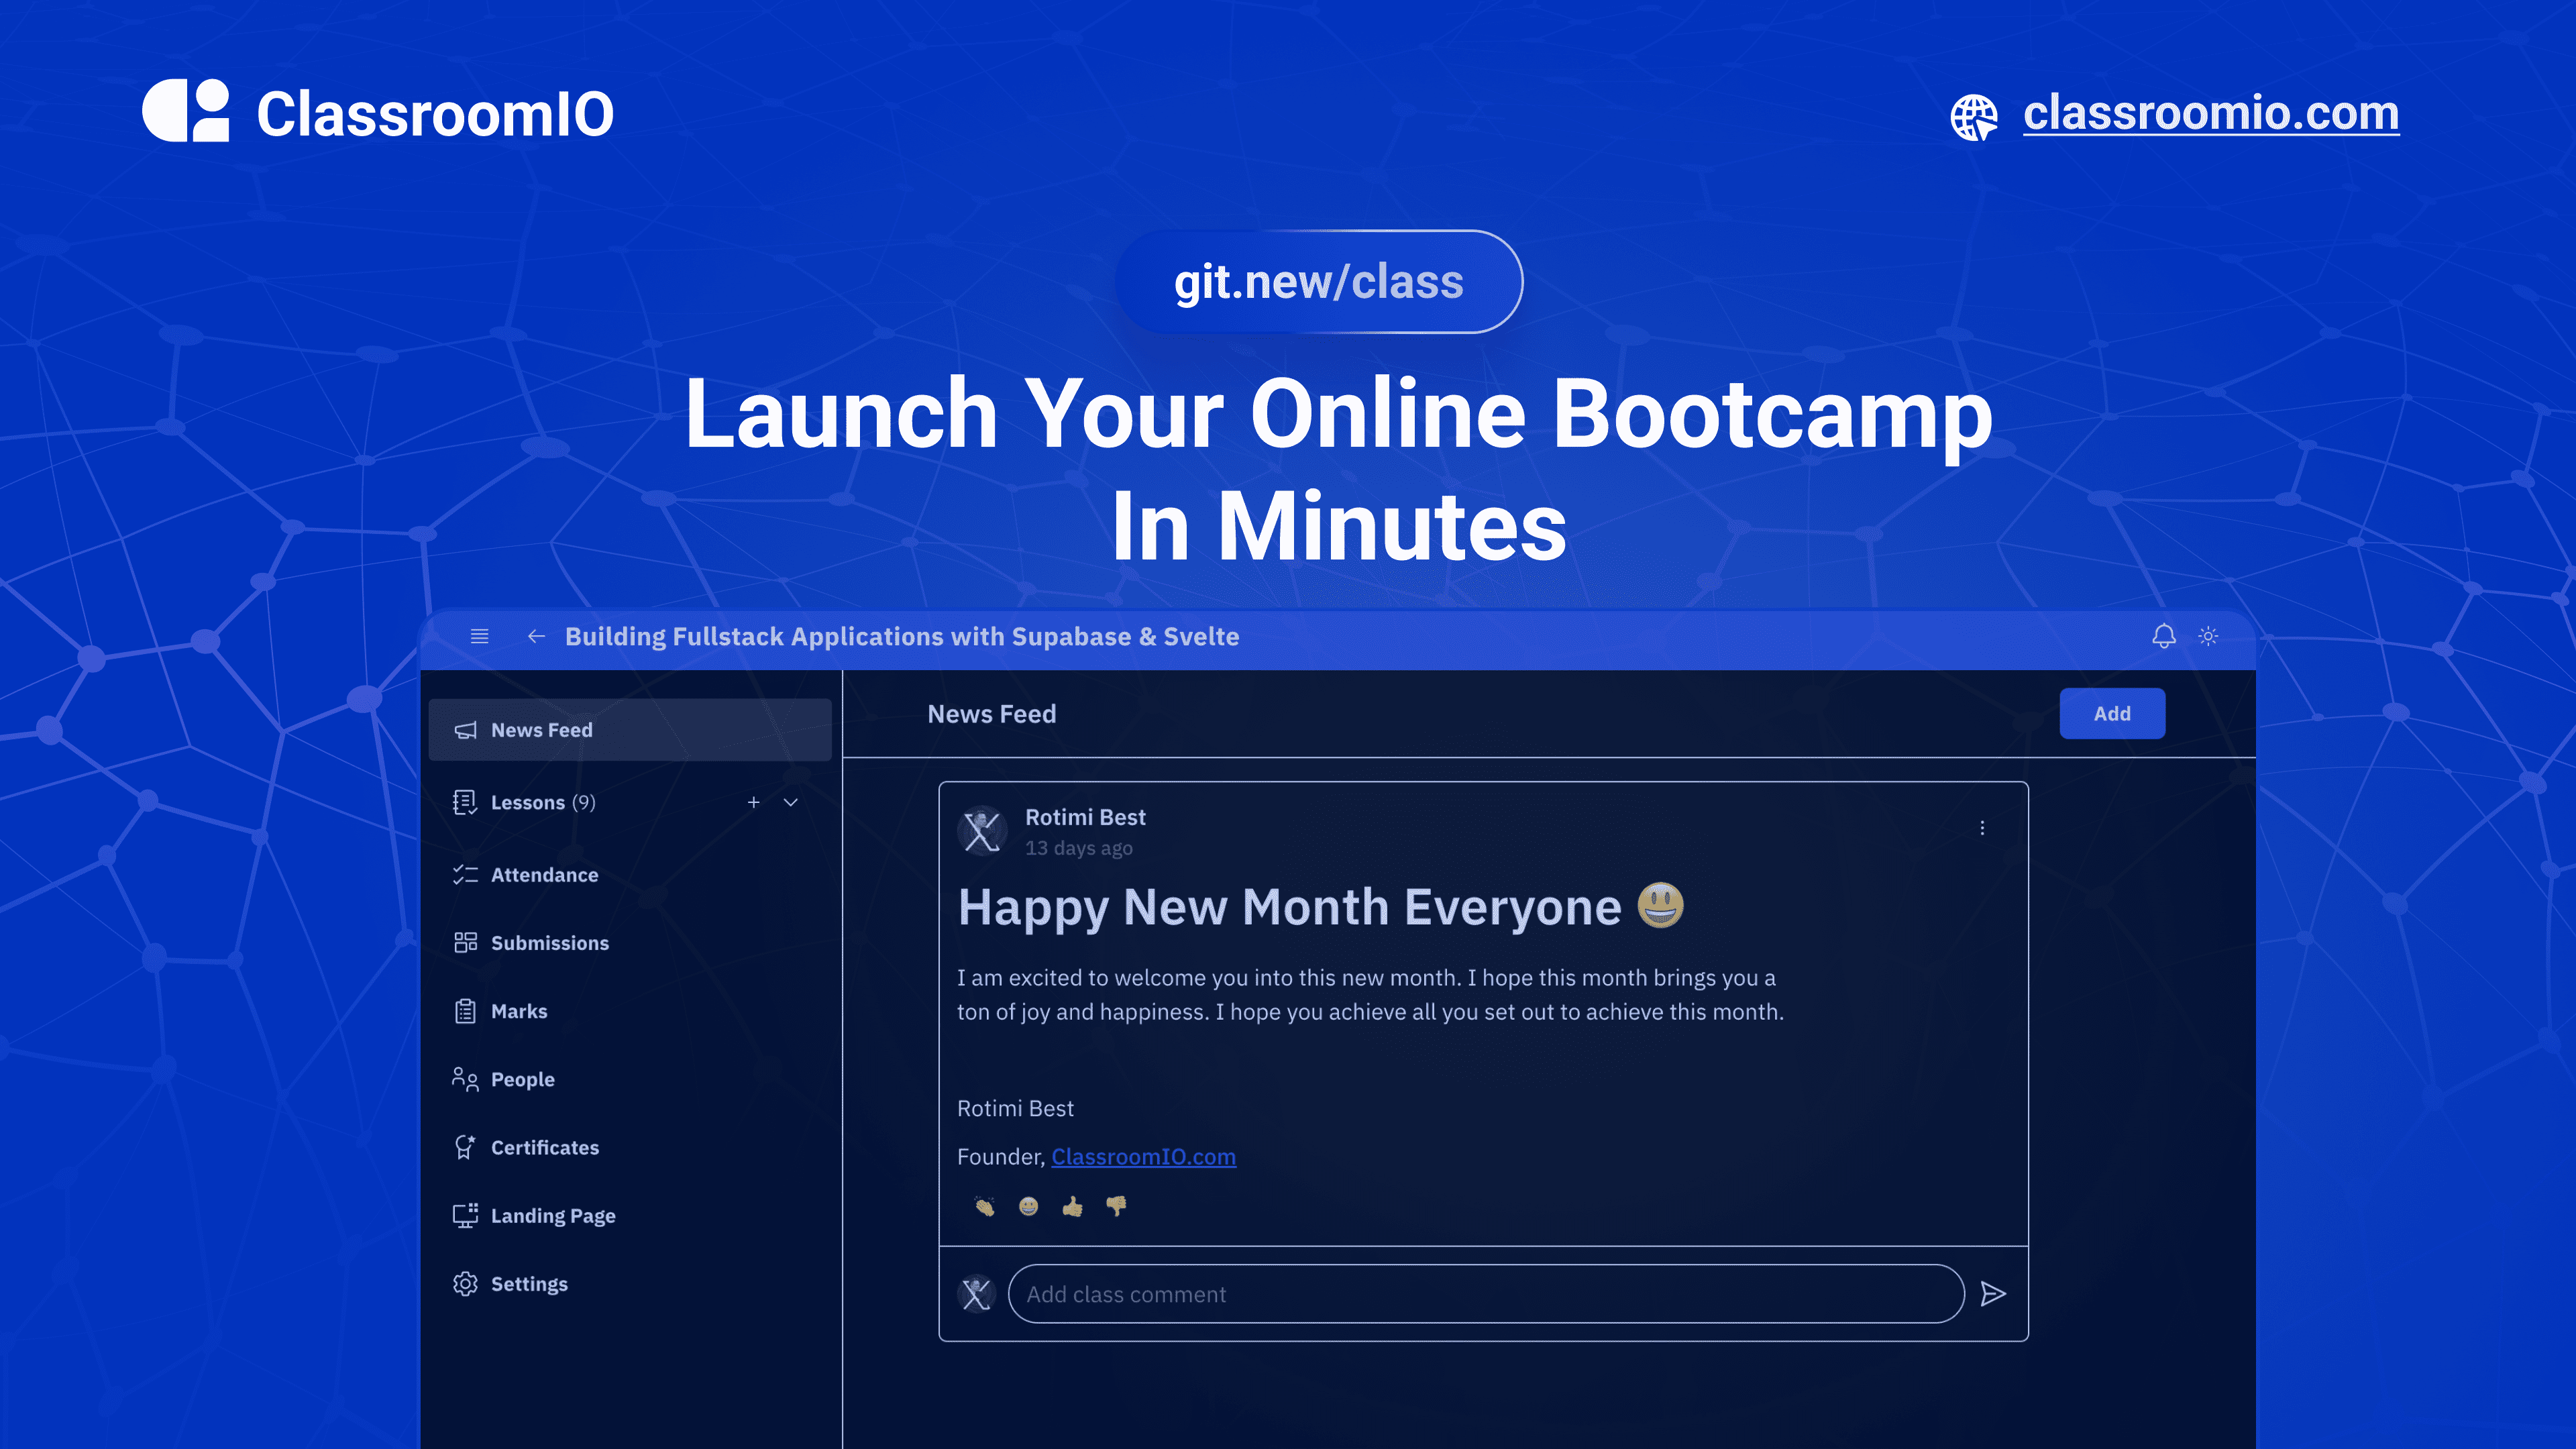 ClassroomIO is the easiest place to launch and scale your online bootcamp.